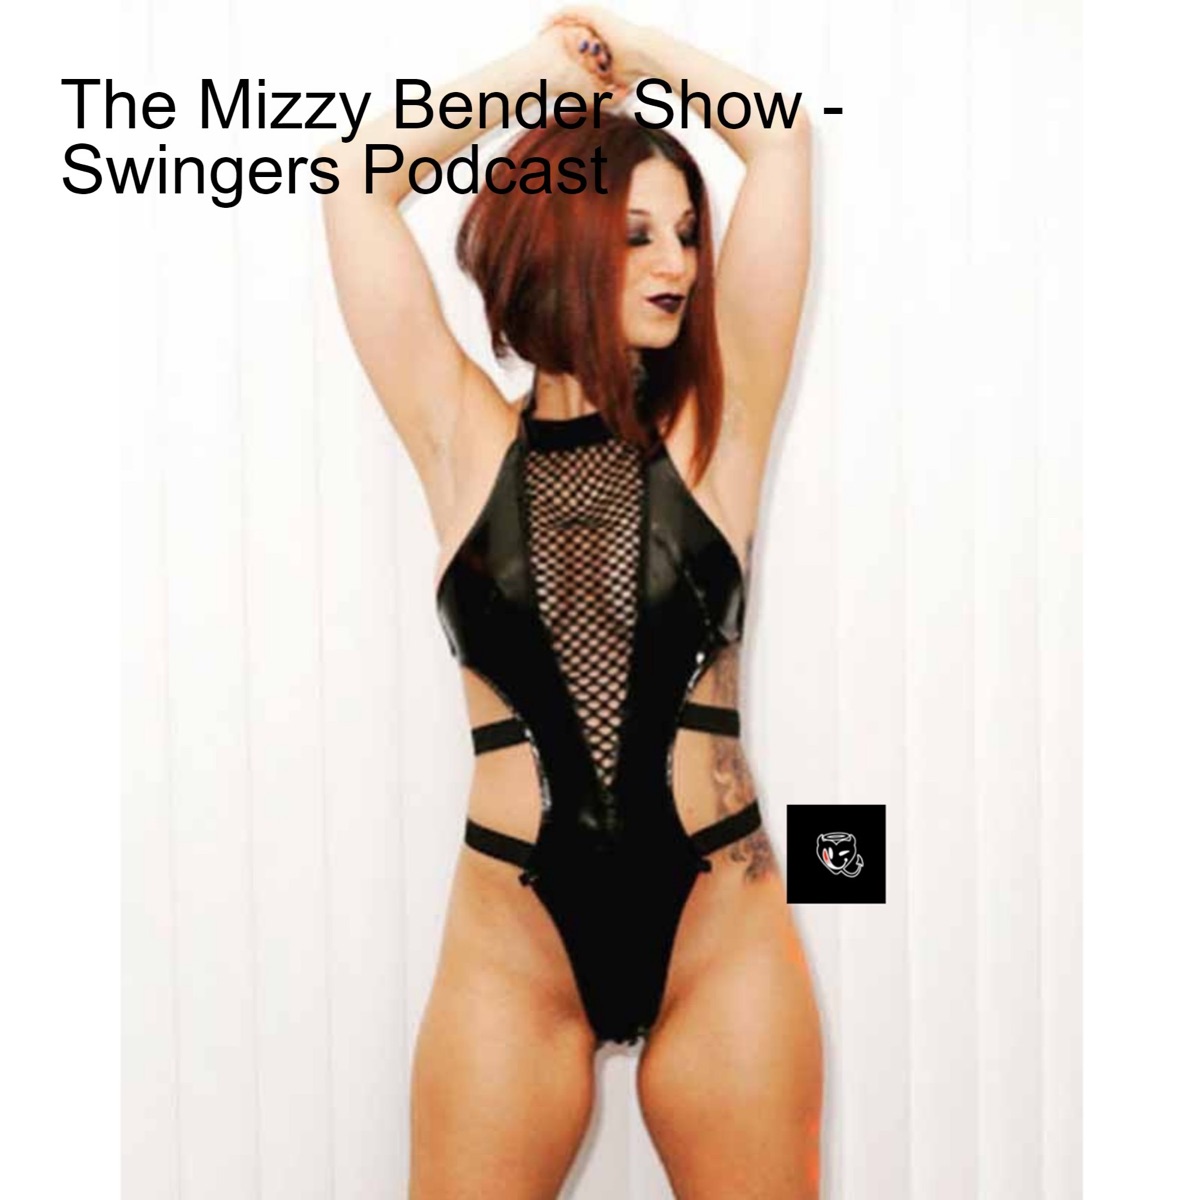 A Swingers Podcast